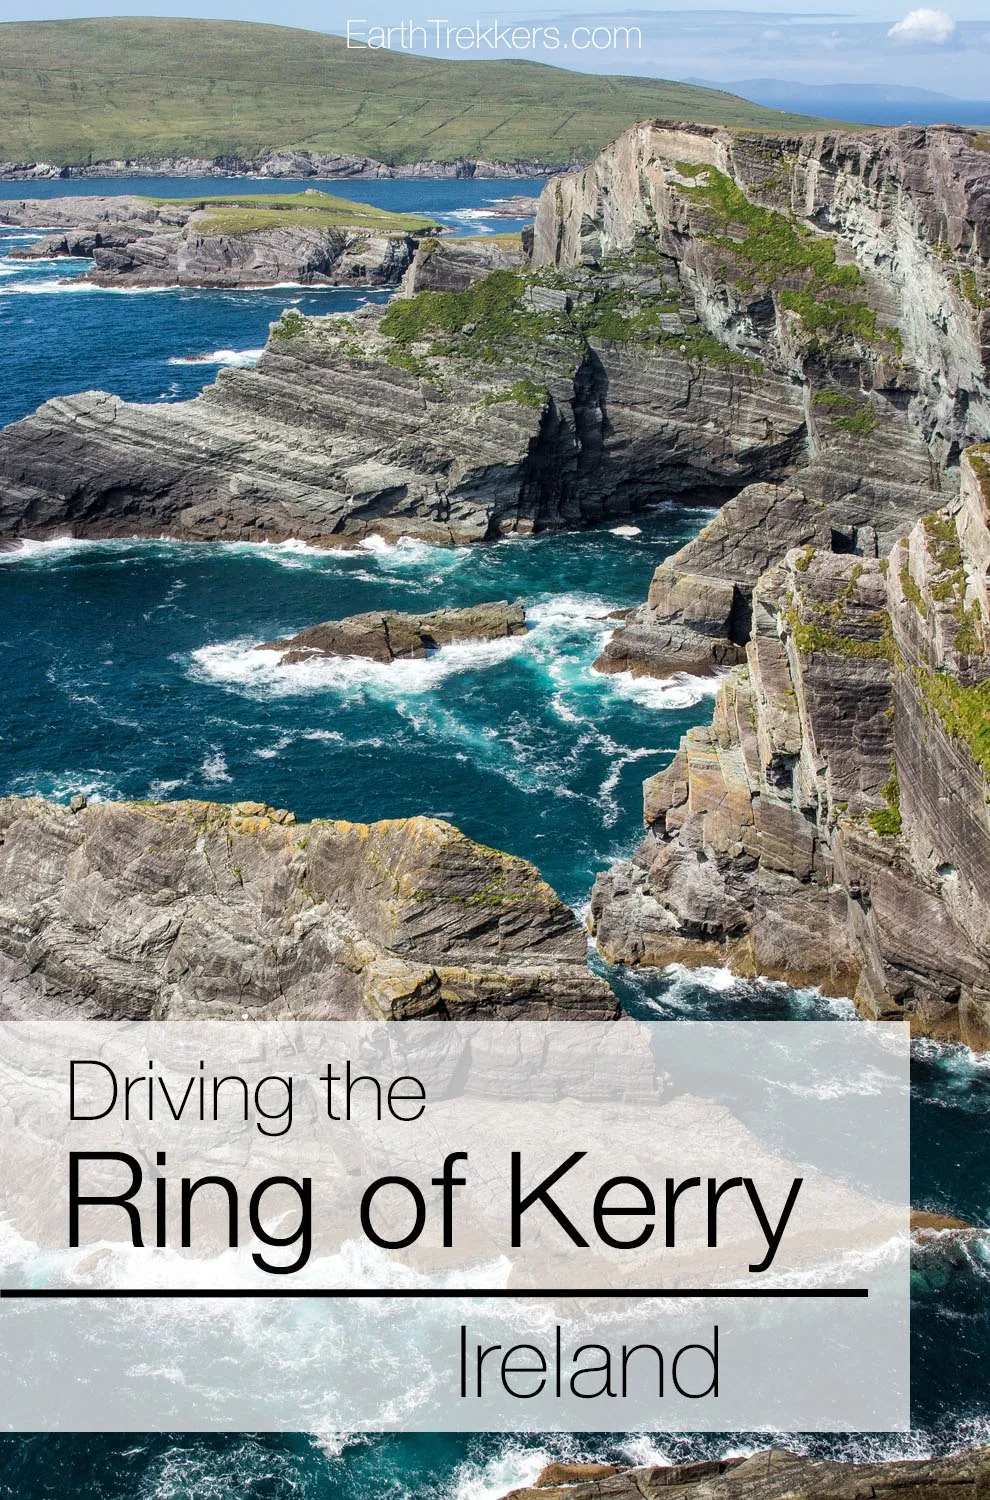 3-Day Tour to Cork, Blarney, Ring of Kerry and the Cliffs of Moher from  Dublin - Get Local Tour